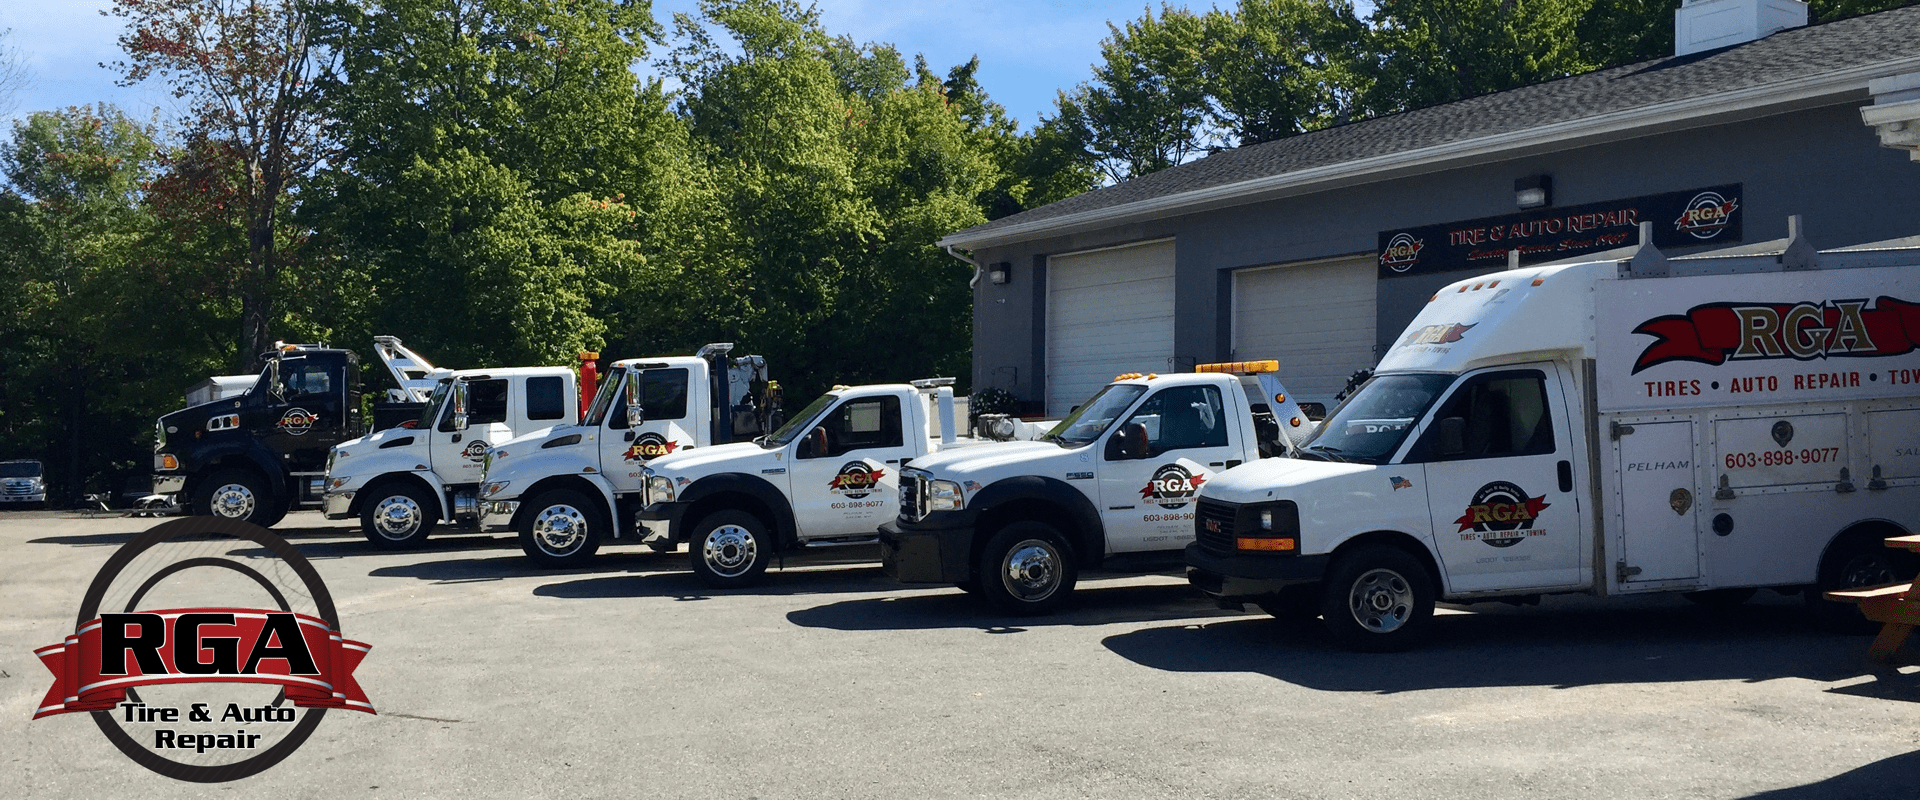 24 hr towing service offered Located in Pelham, NH